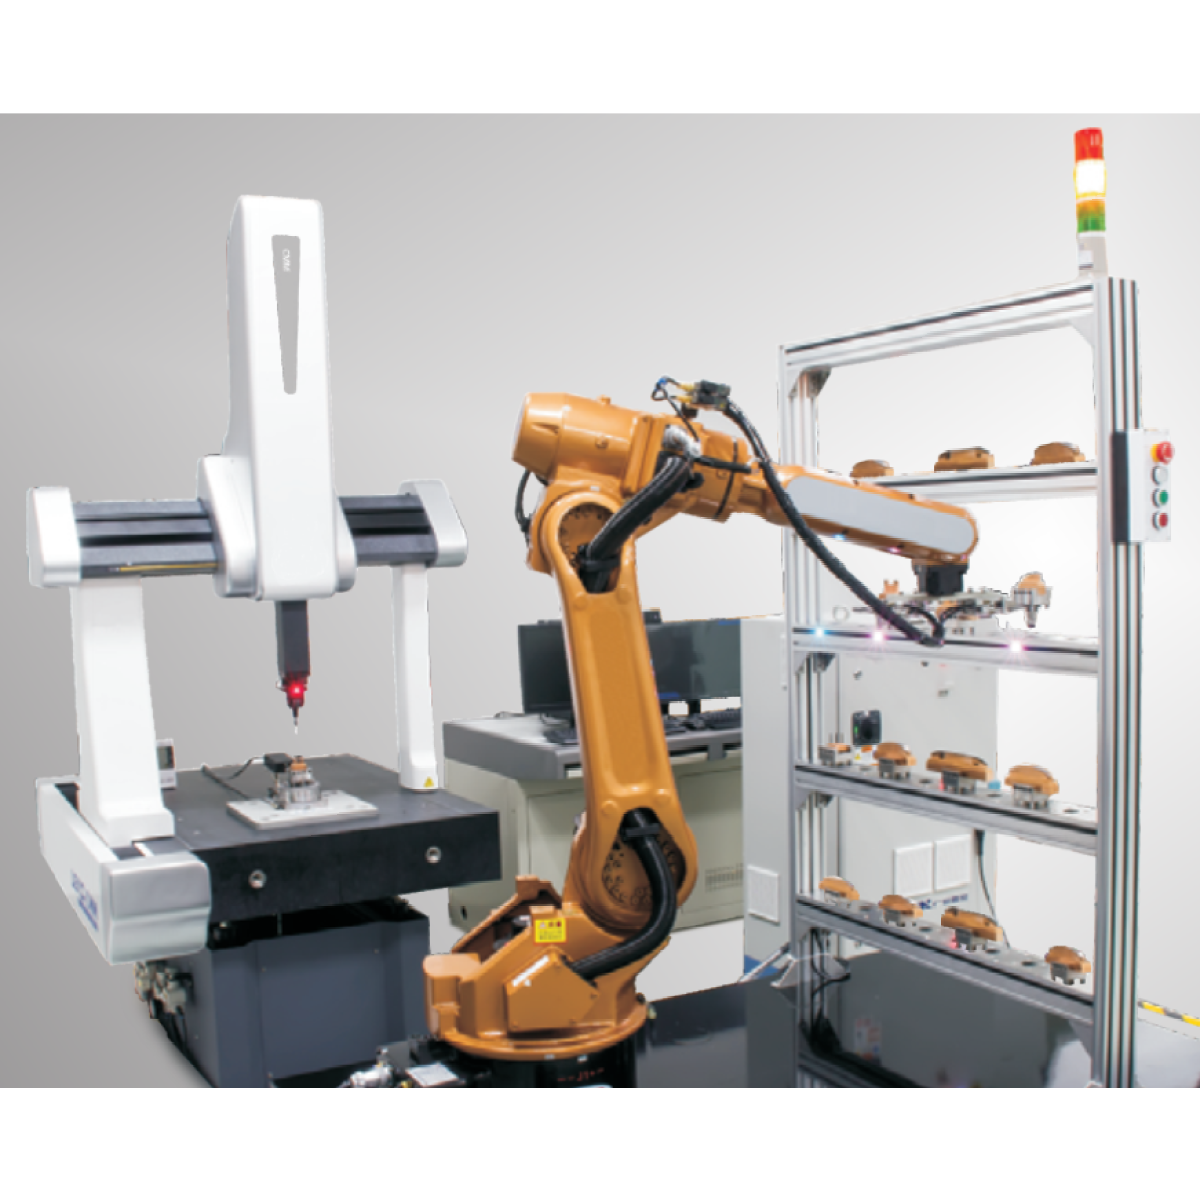 Automatic three coordinate measuring machine with Robot